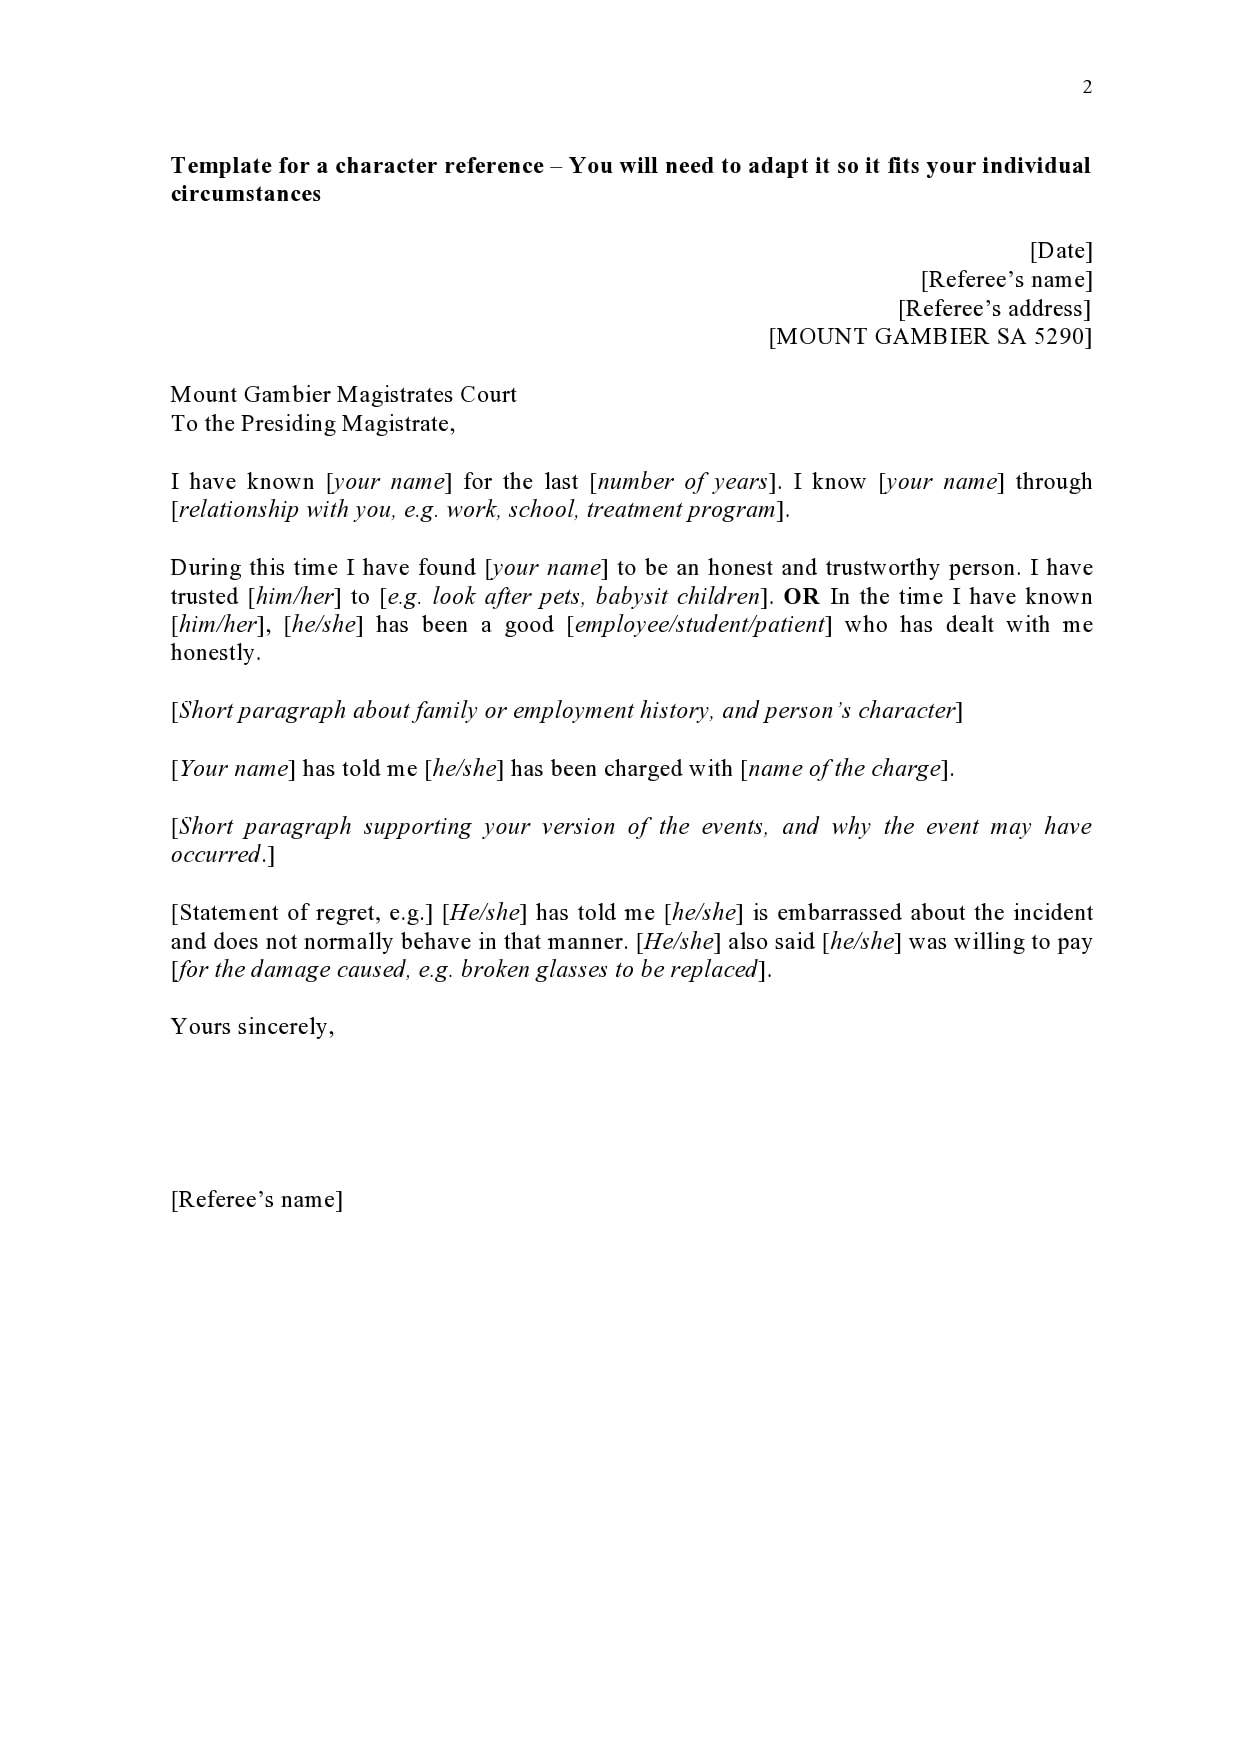 Personal Recommendation Letter Template from templatearchive.com